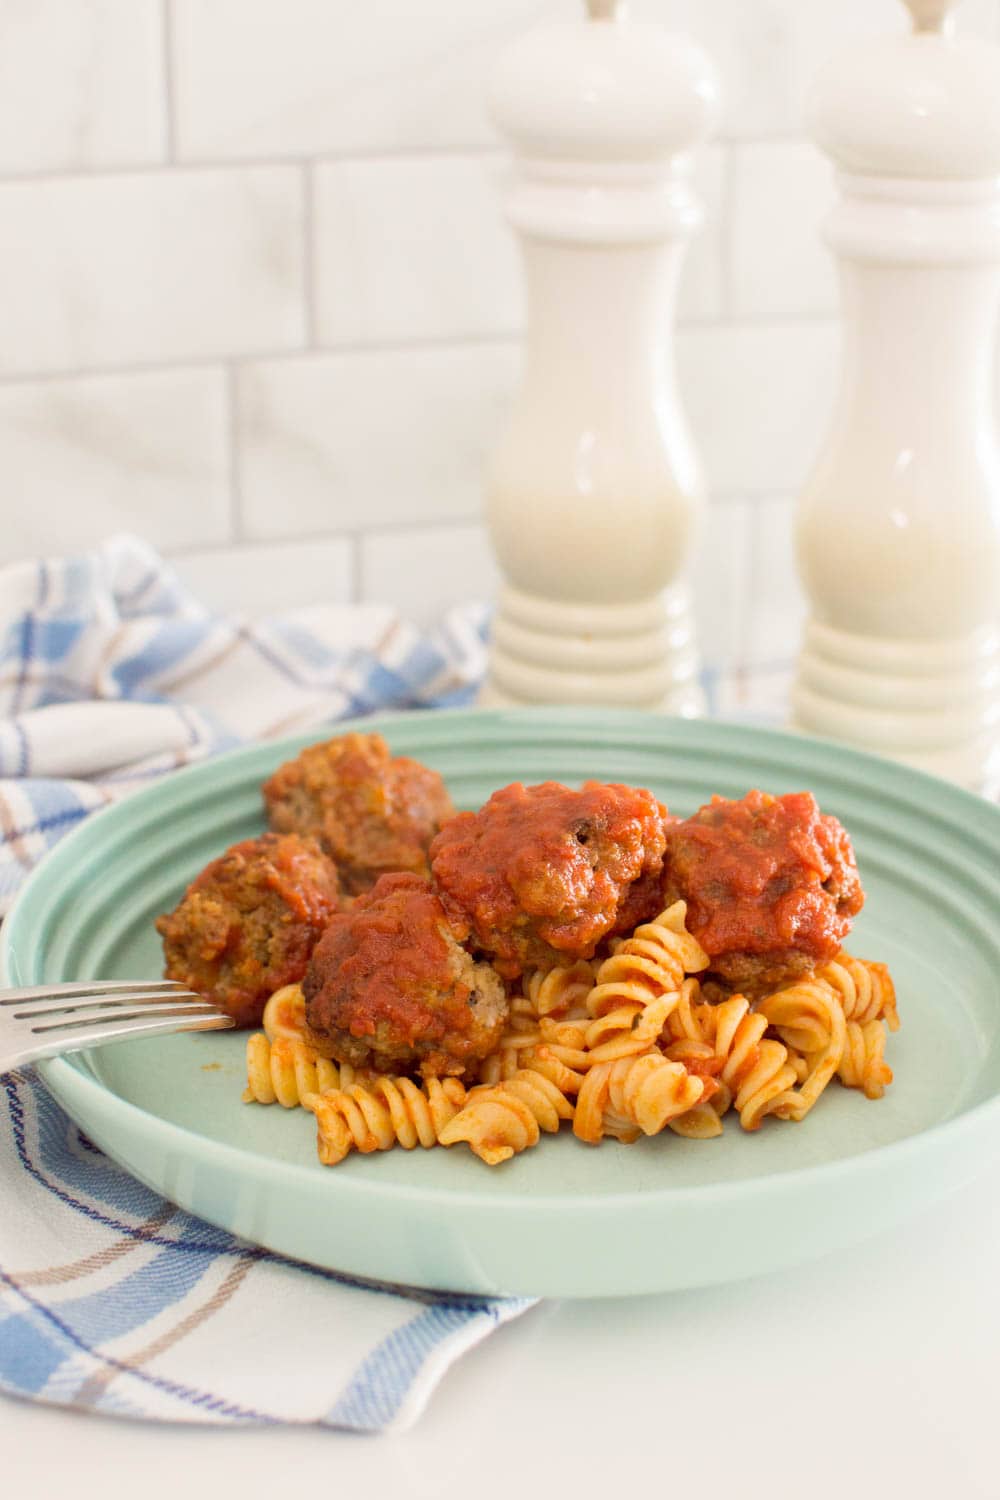 Basic homemade meatballs sitting on a bed of pasta in a turquoise pasta bowl